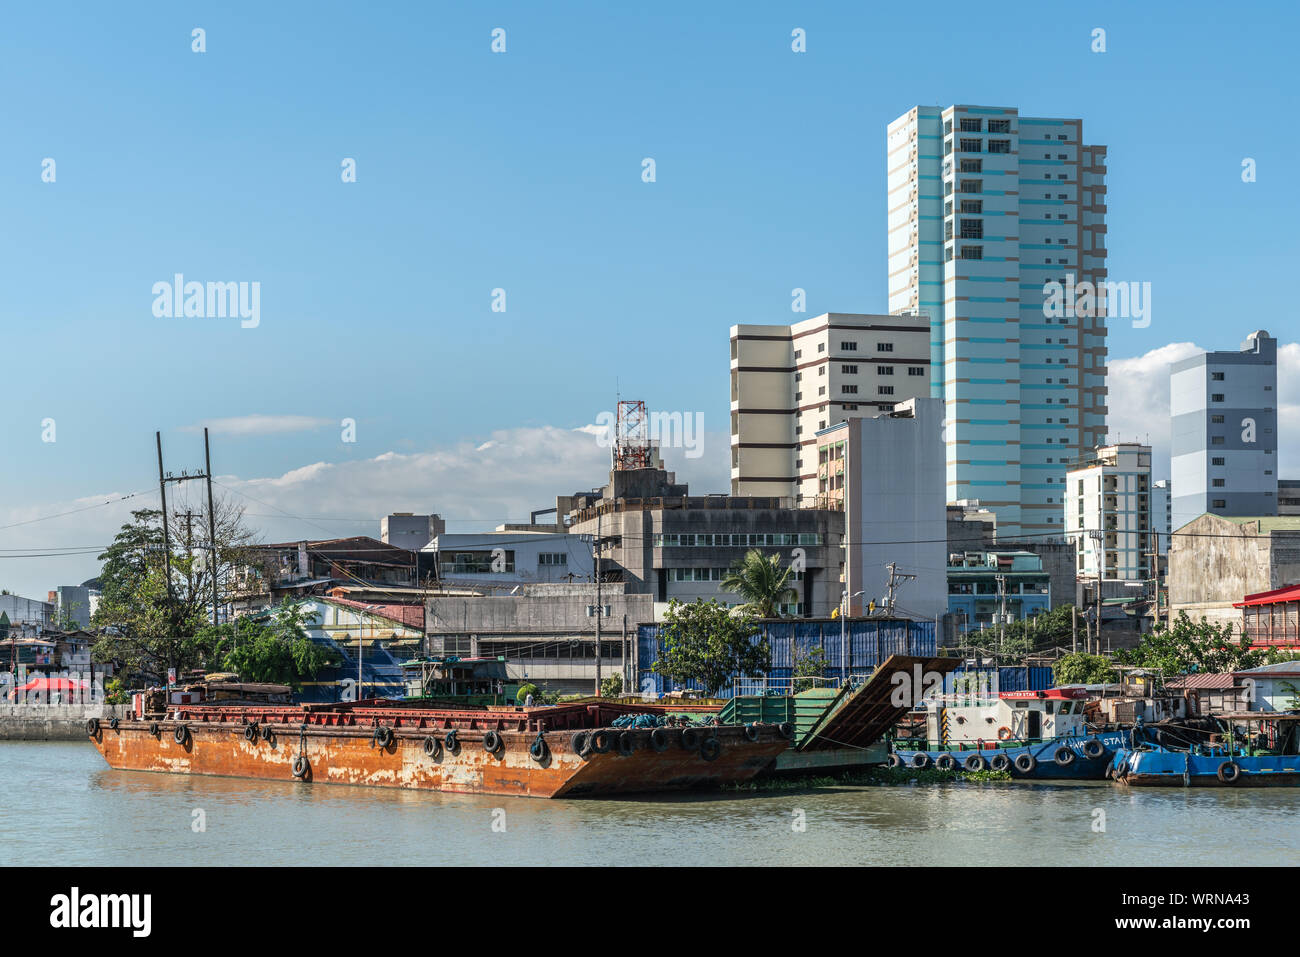 Manila, Philippines - March 5, 2019: Outside Fort Santiago. Barges and skyscrapers apartment buildings across Pasig River under blue sky. Stock Photo